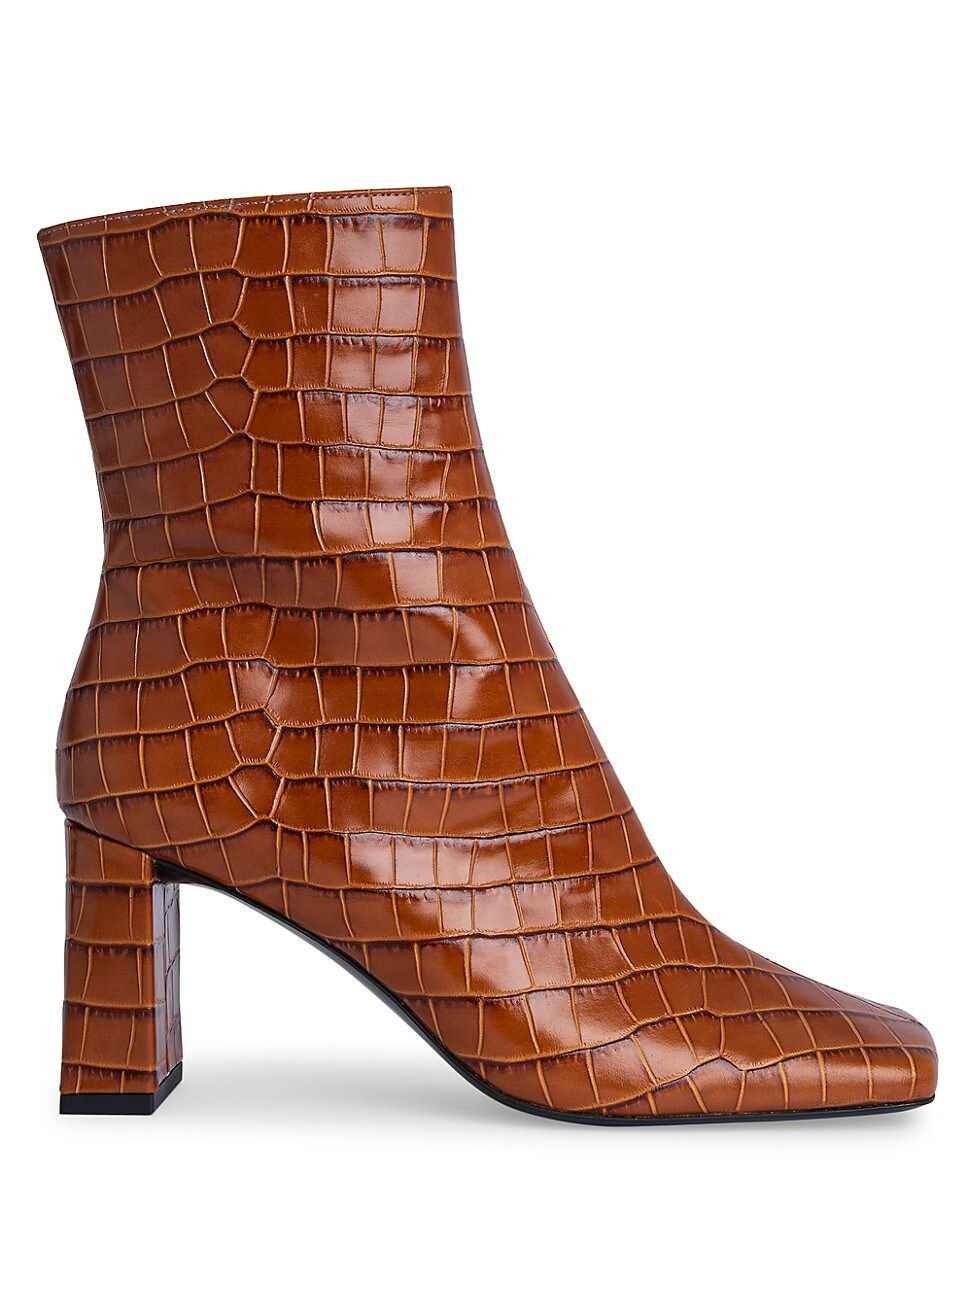 By Far Women's Celine Square-Toe Croc-Embossed Leather Ankle Boots - Tan - Size 39 (9) | Saks Fifth Avenue